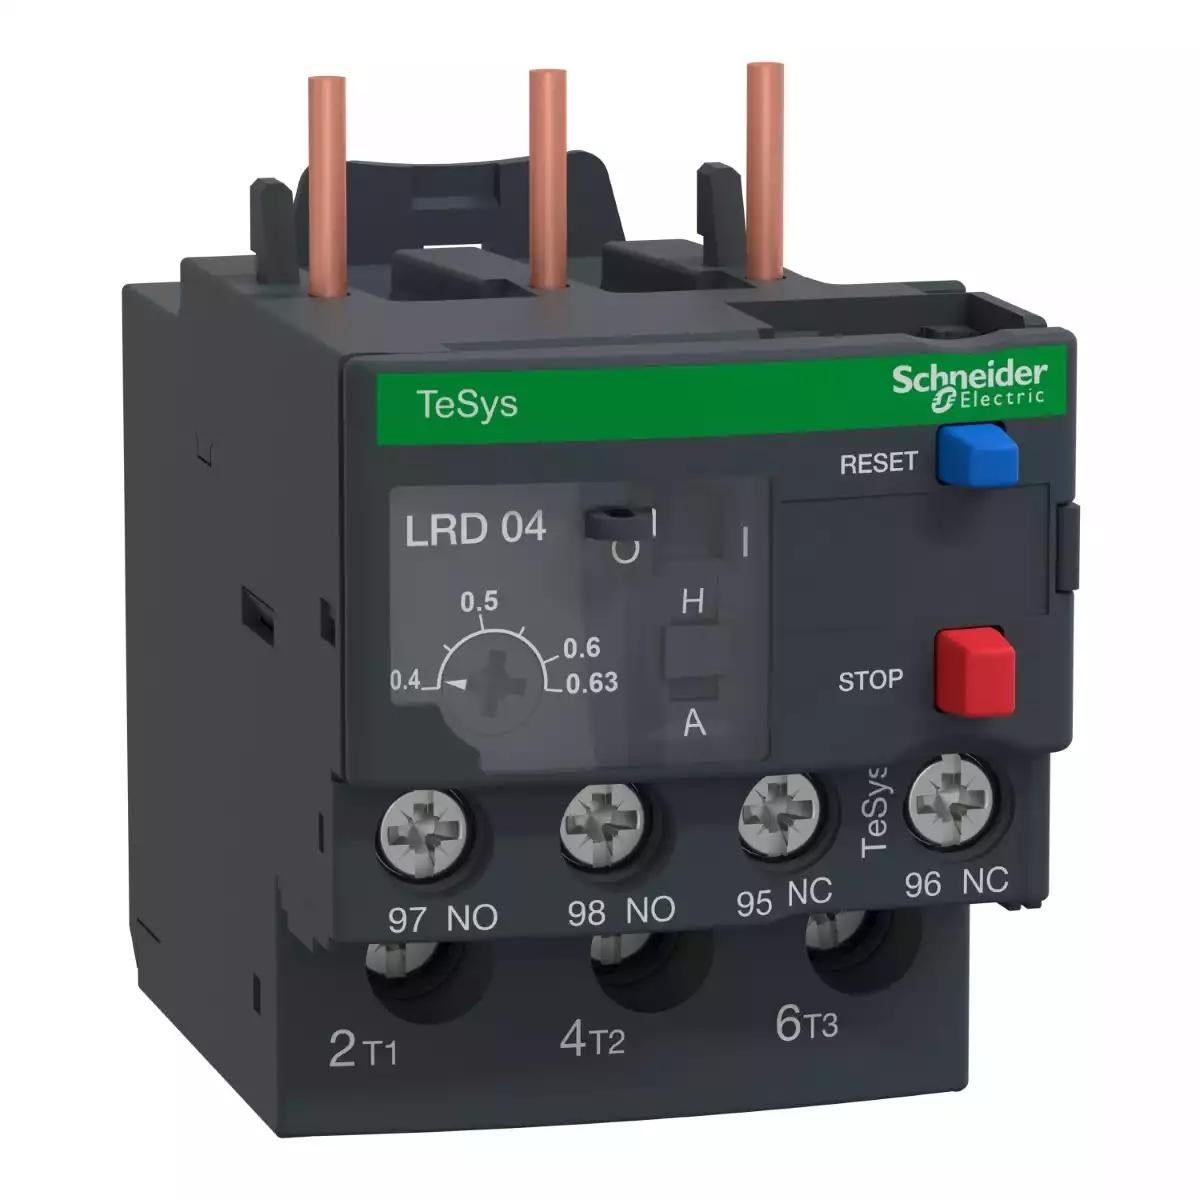 Thermal overload relay,TeSys Deca,0.4-0.63A,1NO+1NC,class 20,lugs ring terminal